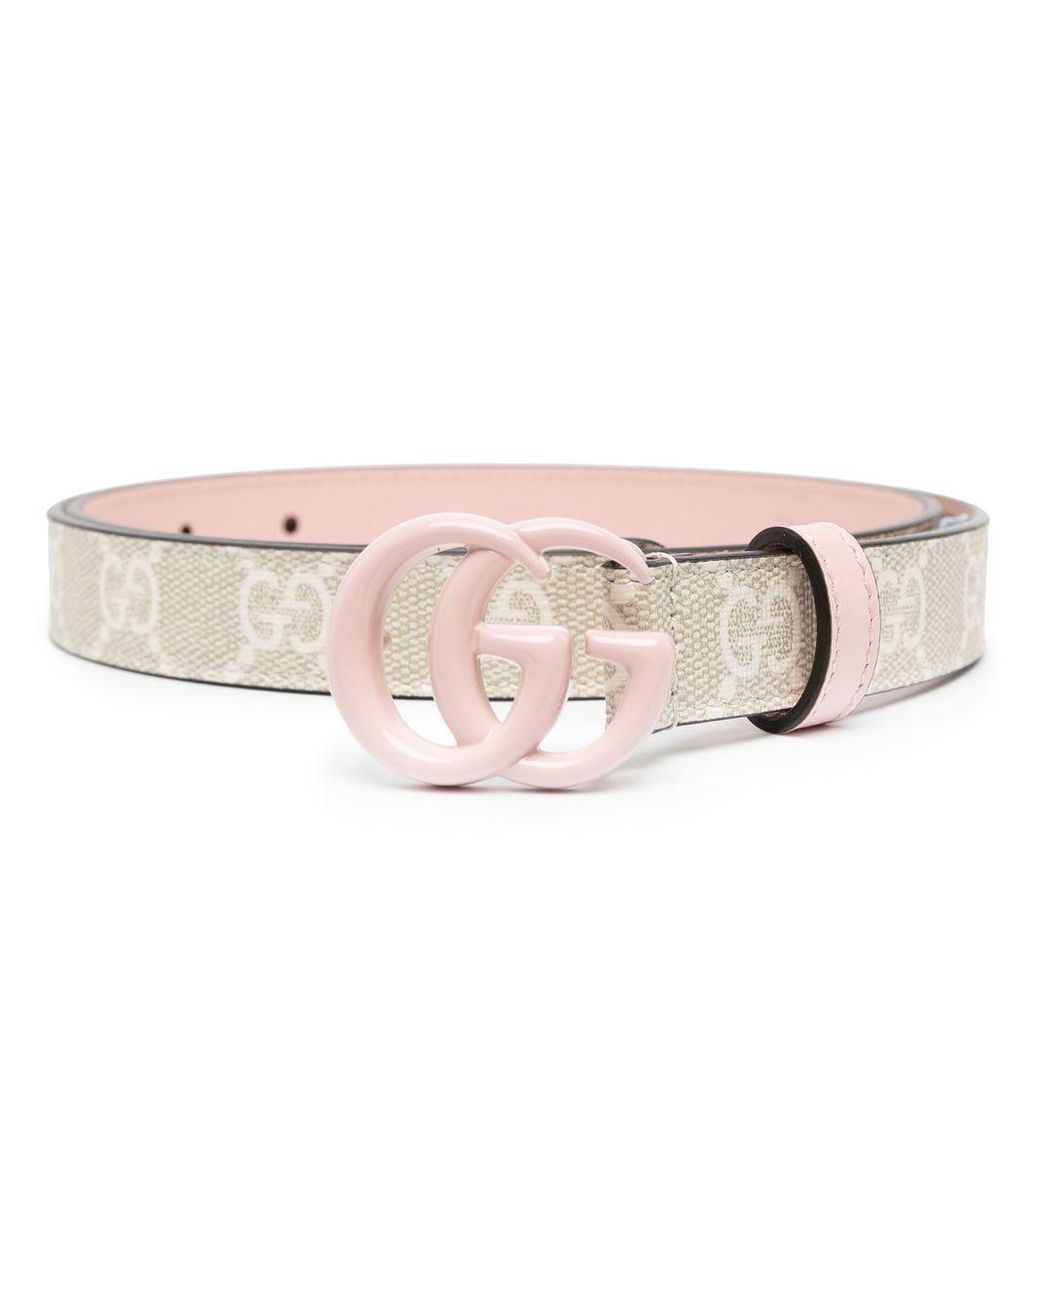 Gucci Gg Marmont Belt in Pink | Lyst